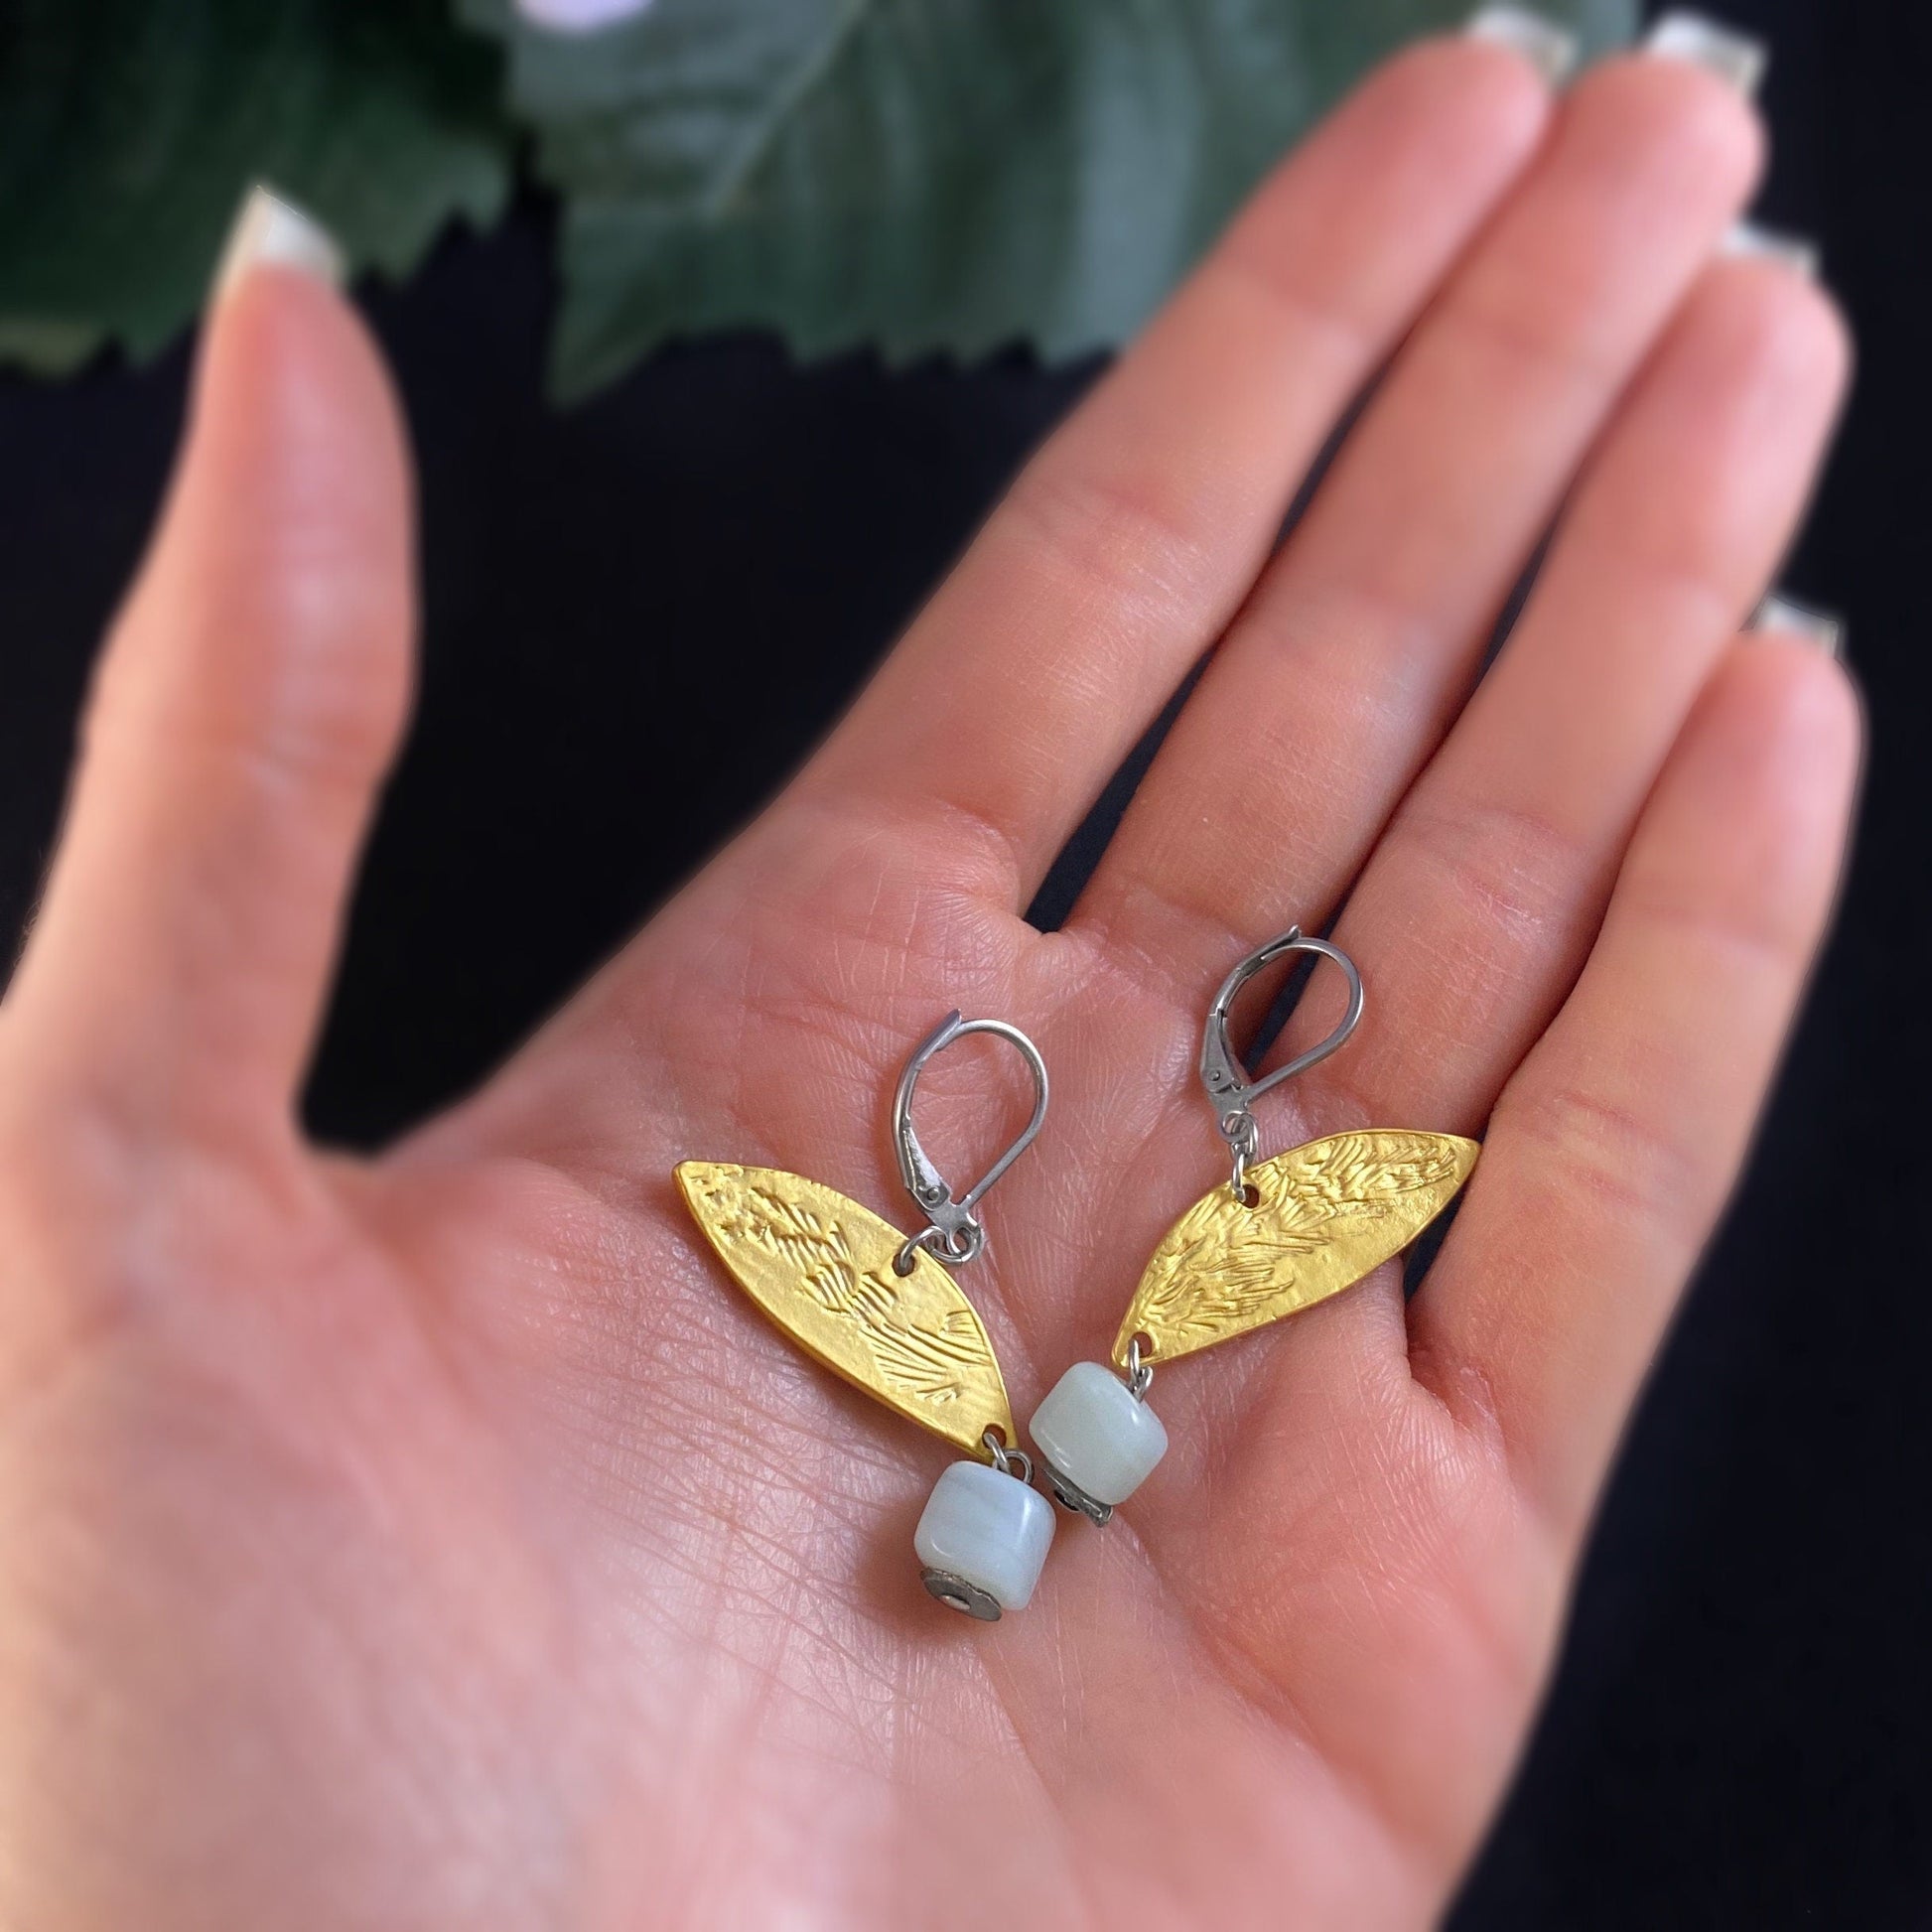 Gold Leaf Earrings with Pale Green Bead - Handmade in Canada, Anne-Marie Chagnon Jewelry